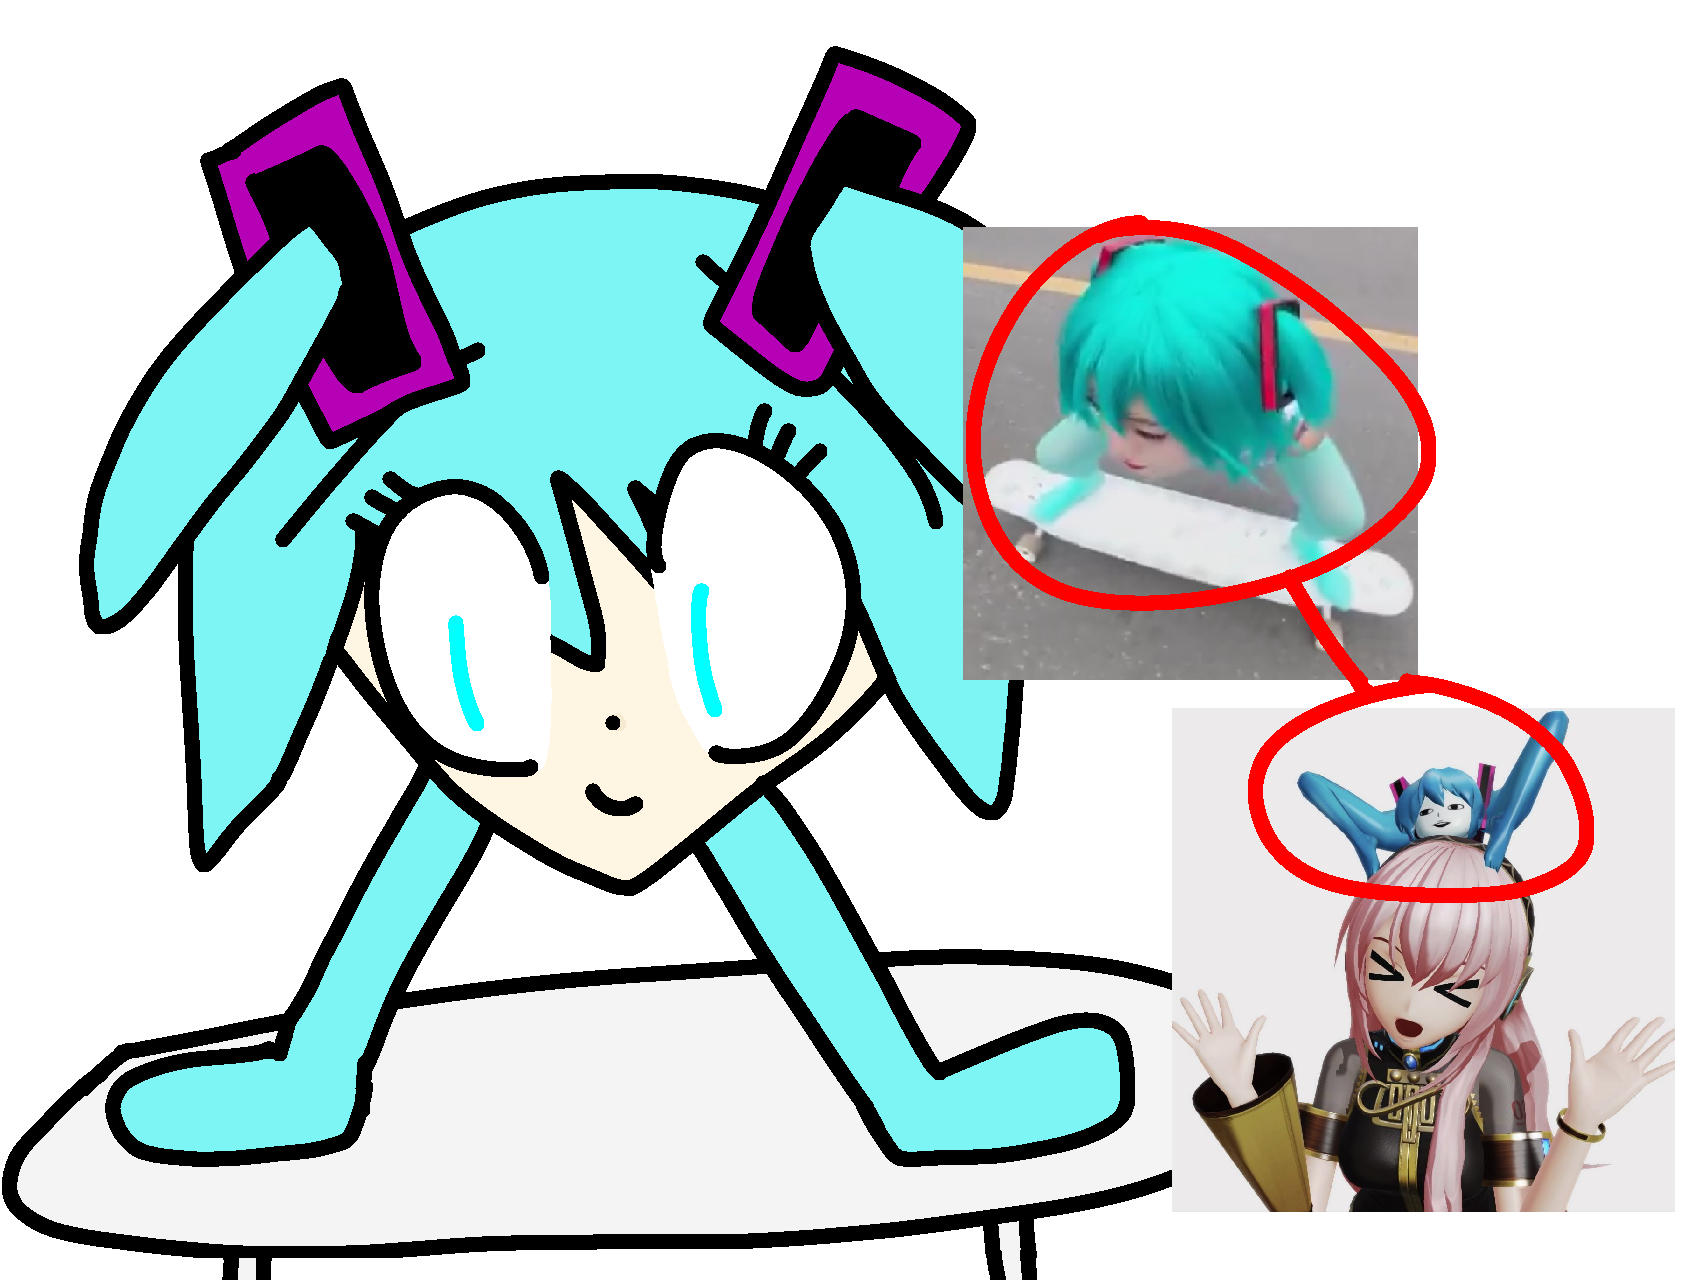 A digital drawing of Hatsune Miku on a skateboard, with only her head and part of her hair is becoming her legs. Next to the drawing is the reference, which is a screenshot of a video of a cosplayer with a skateboard, with the camera angle making the video show her head and legs. There is a circle drawn around the reference, directing to another circle, drawn around an image of Luka Megurine, with an annoyed expression, with a mini Hatsune Miku head with her hair as her legs, placed on Luka's head.